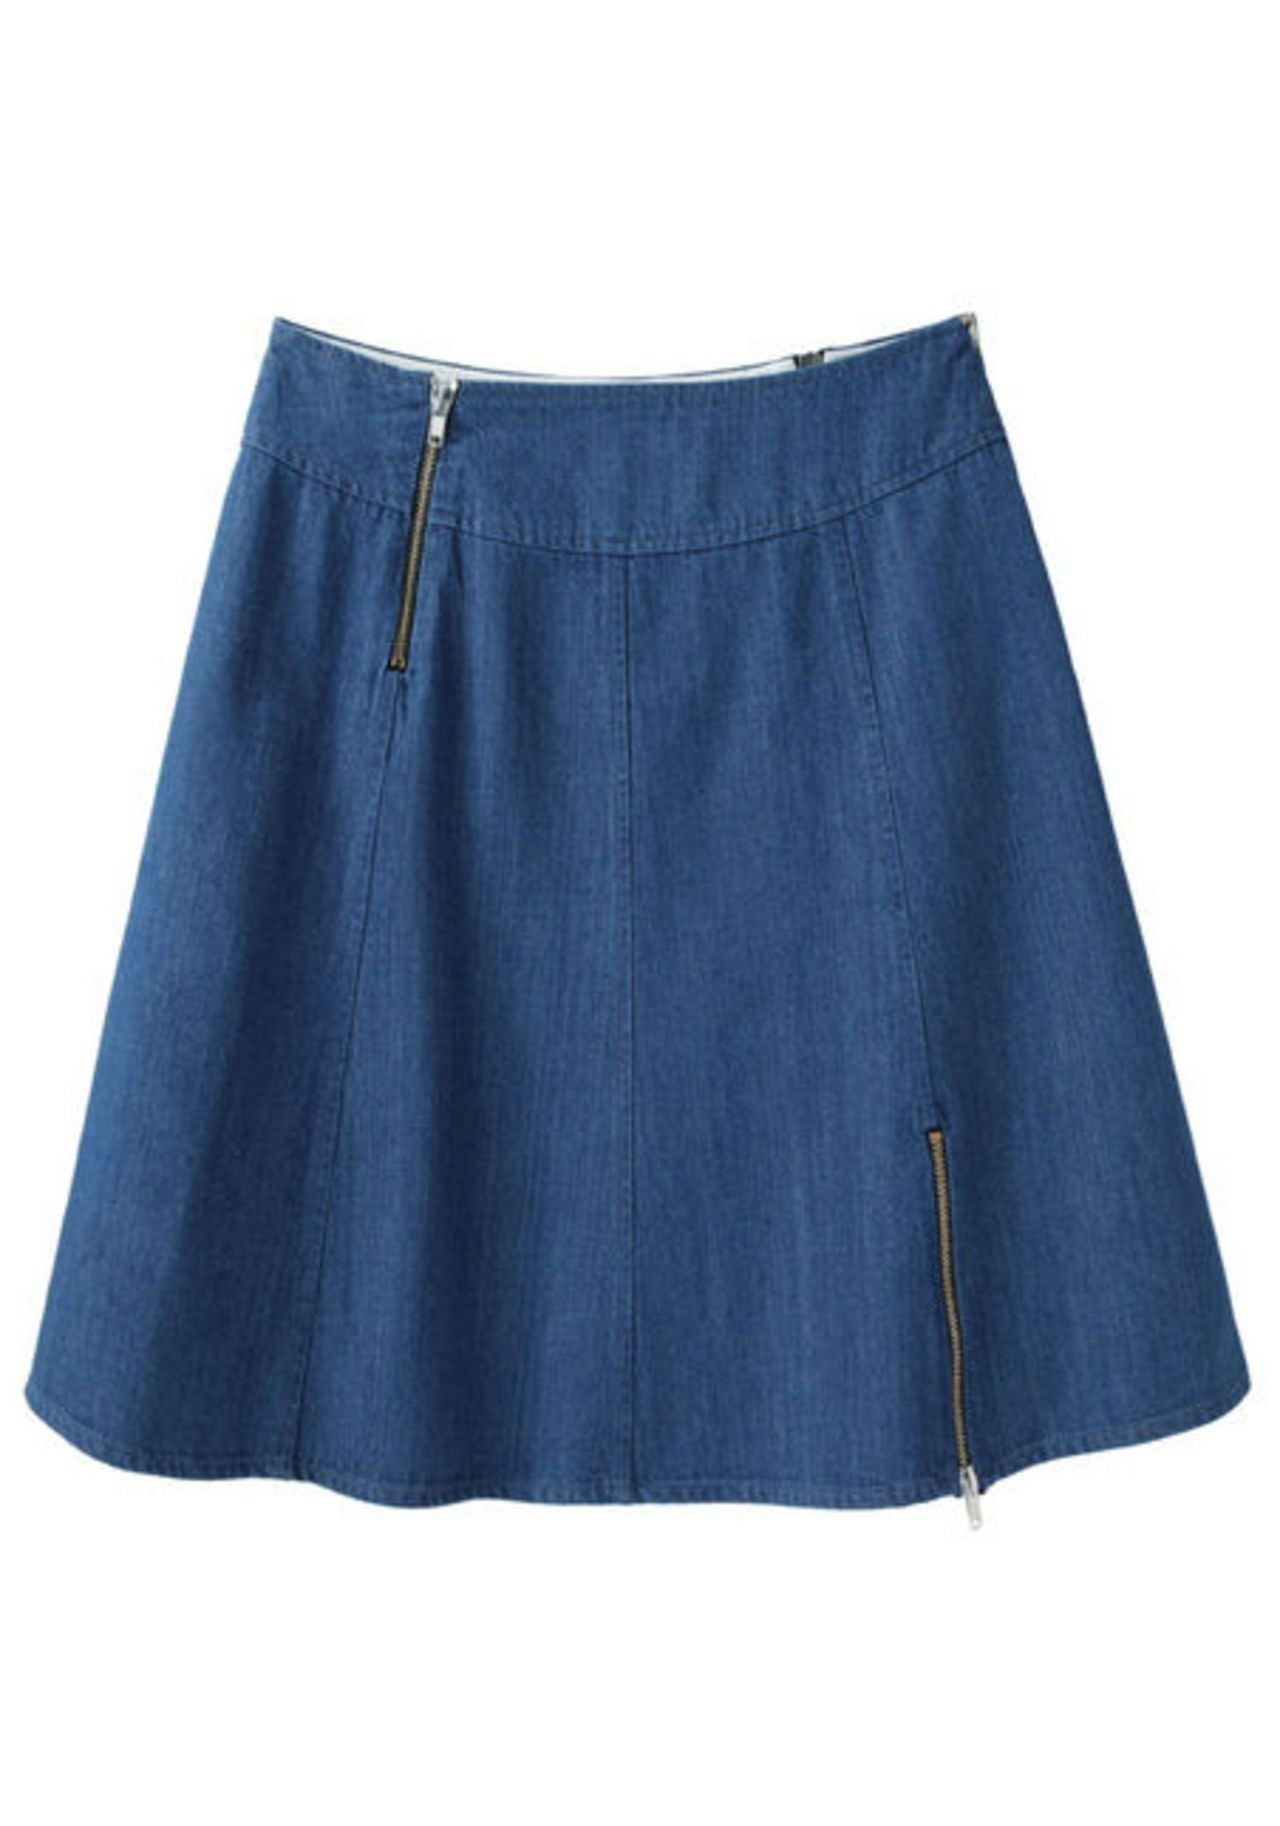 chlapec by band of outsiders denim skirt 1